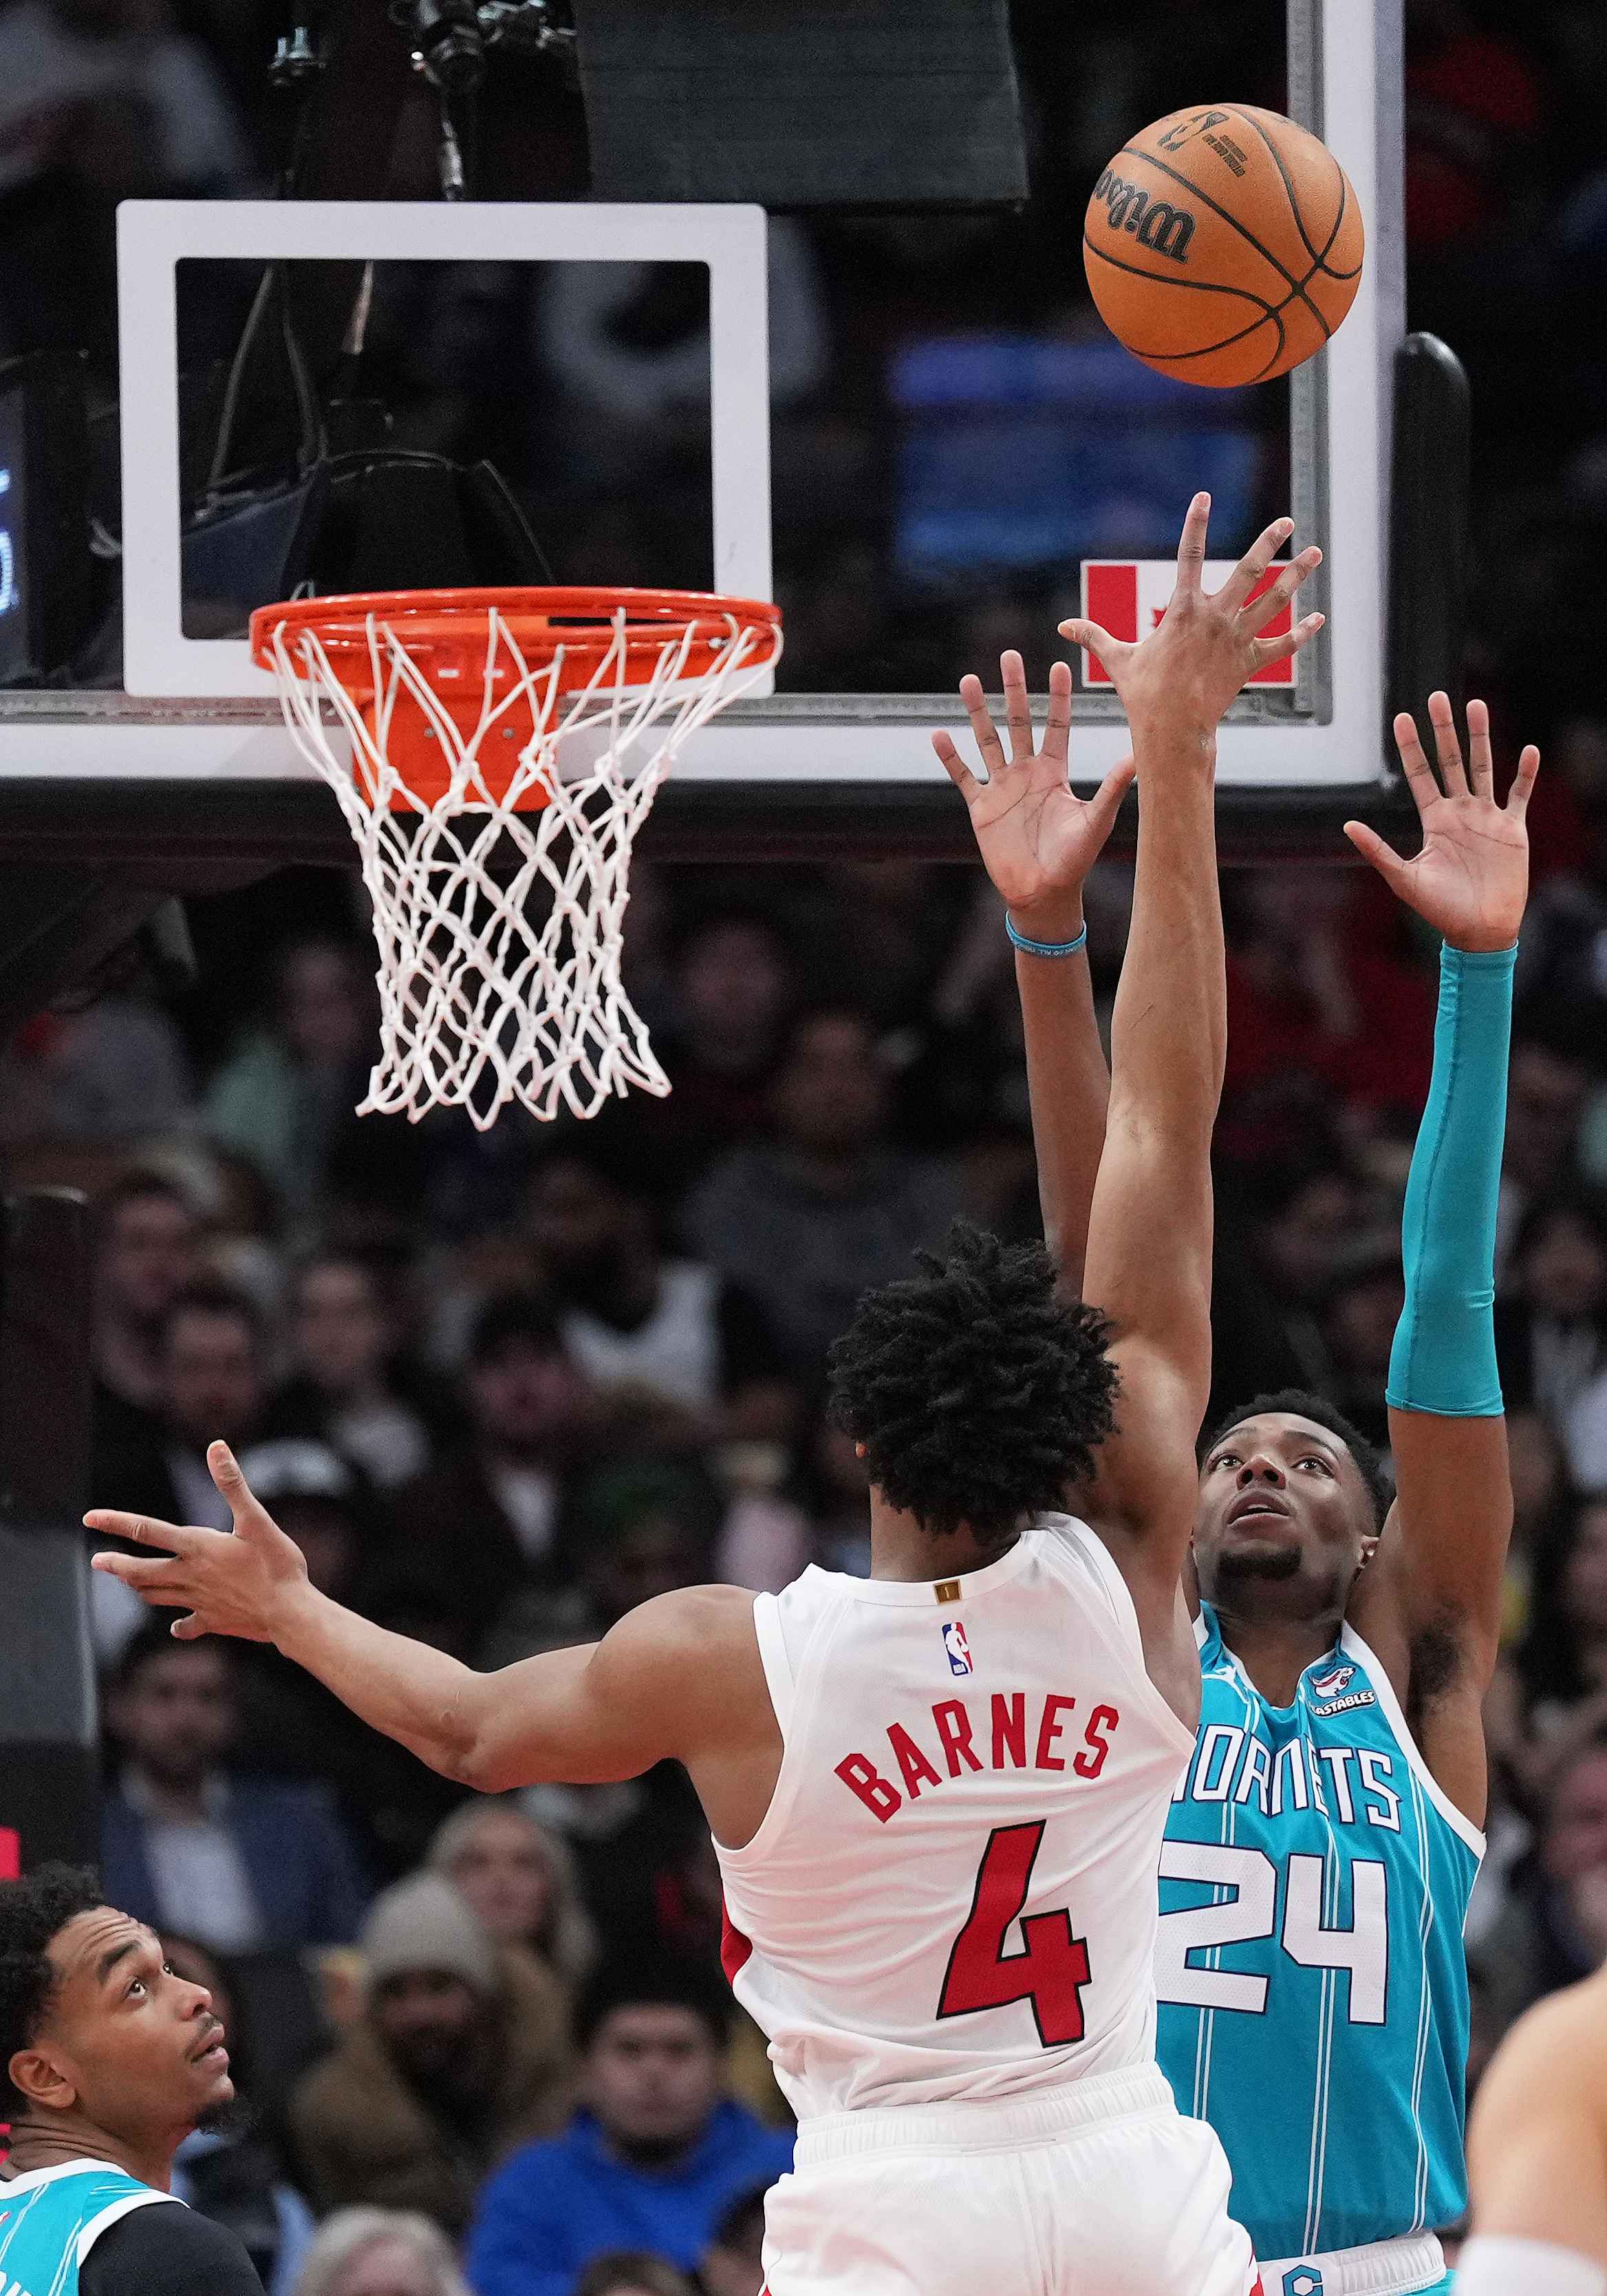 Short-handed Charlotte Hornets struggle to keep pace - The Charlotte Post